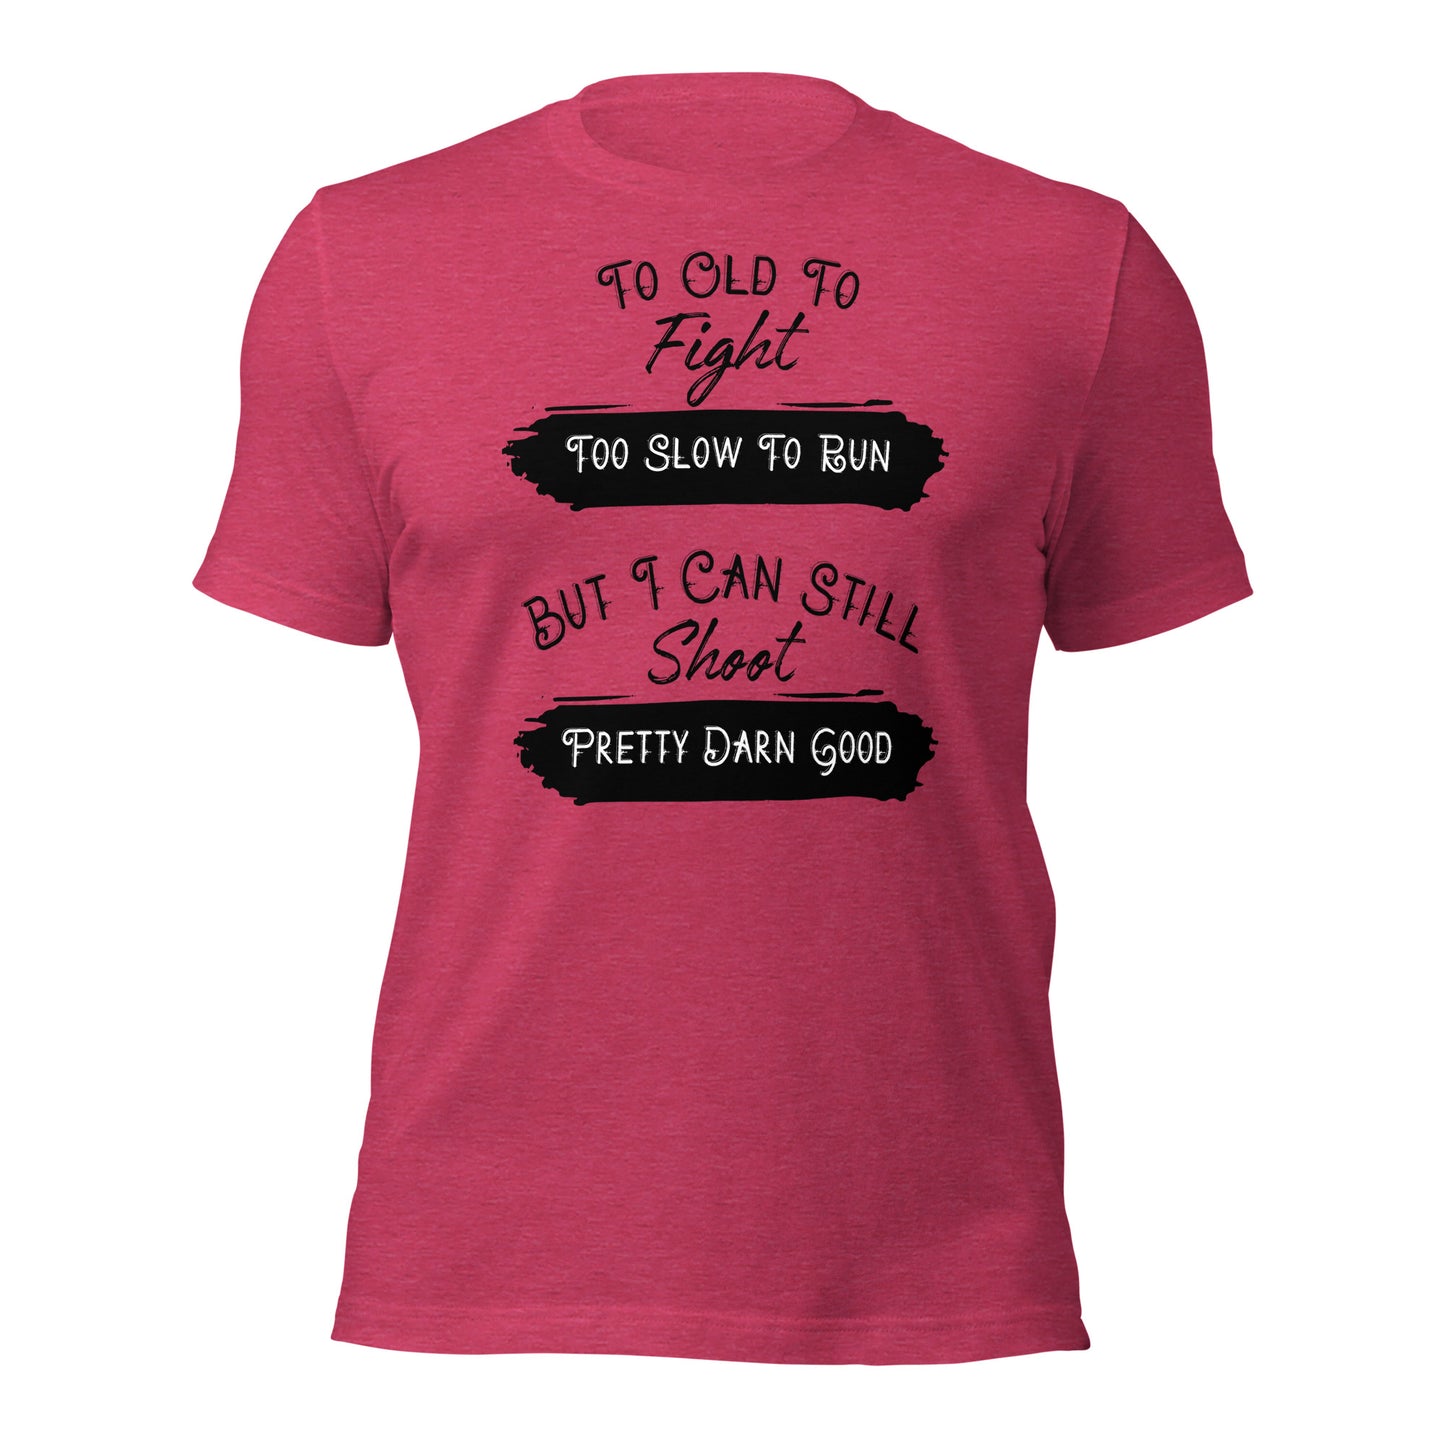 "To Old To Fight" T-shirt - Weave Got Gifts - Unique Gifts You Won’t Find Anywhere Else!